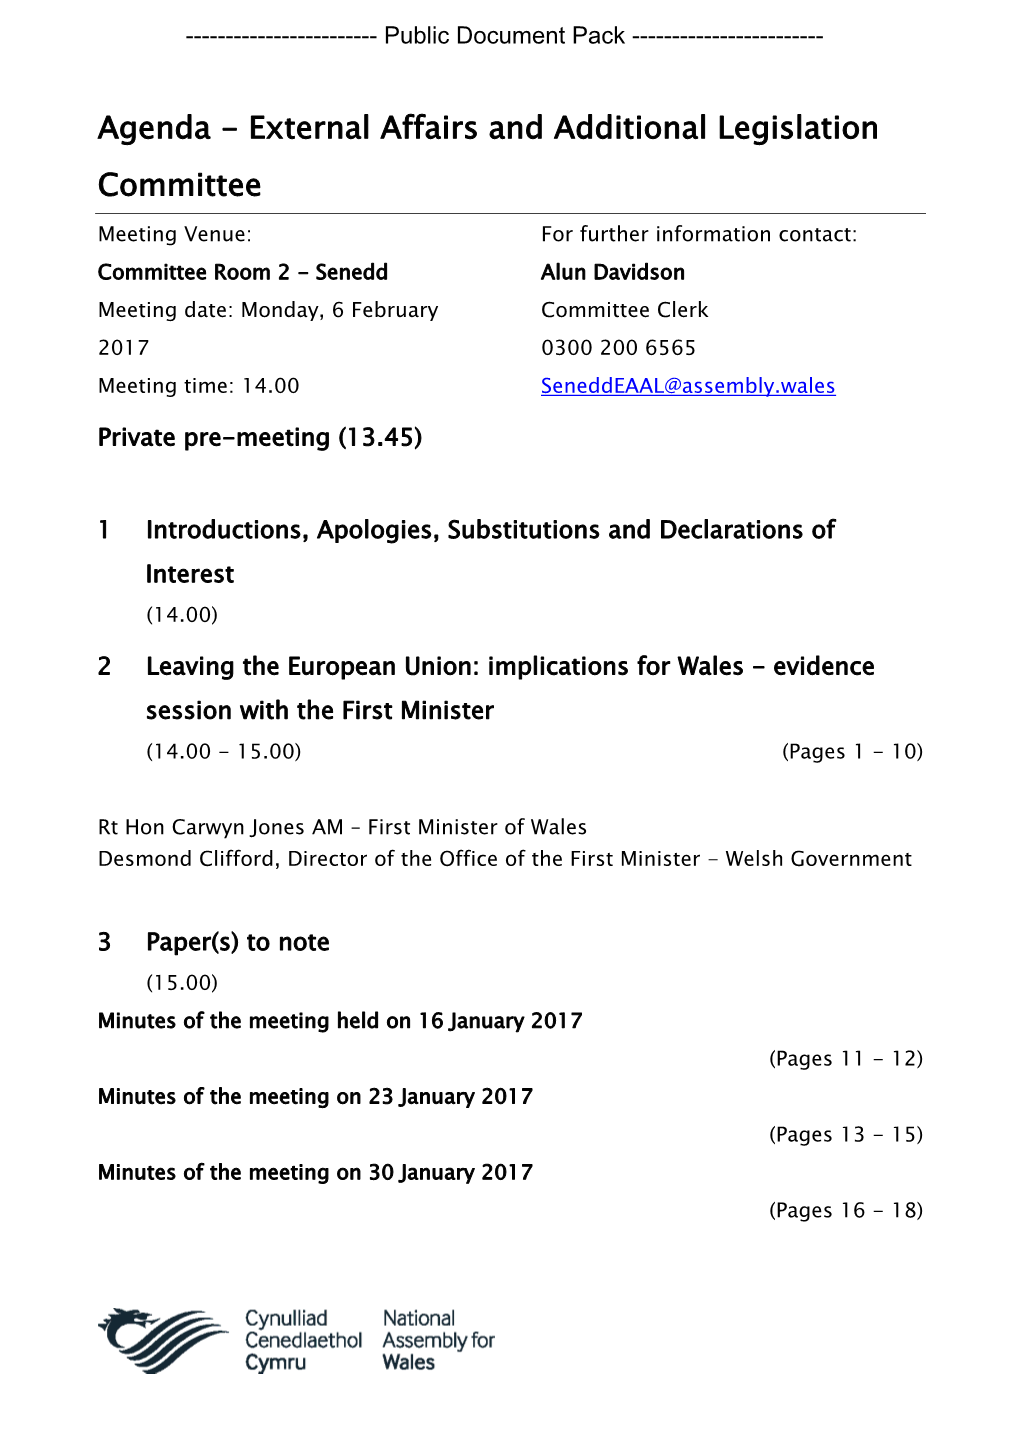 (Public Pack)Agenda Document for External Affairs and Additional